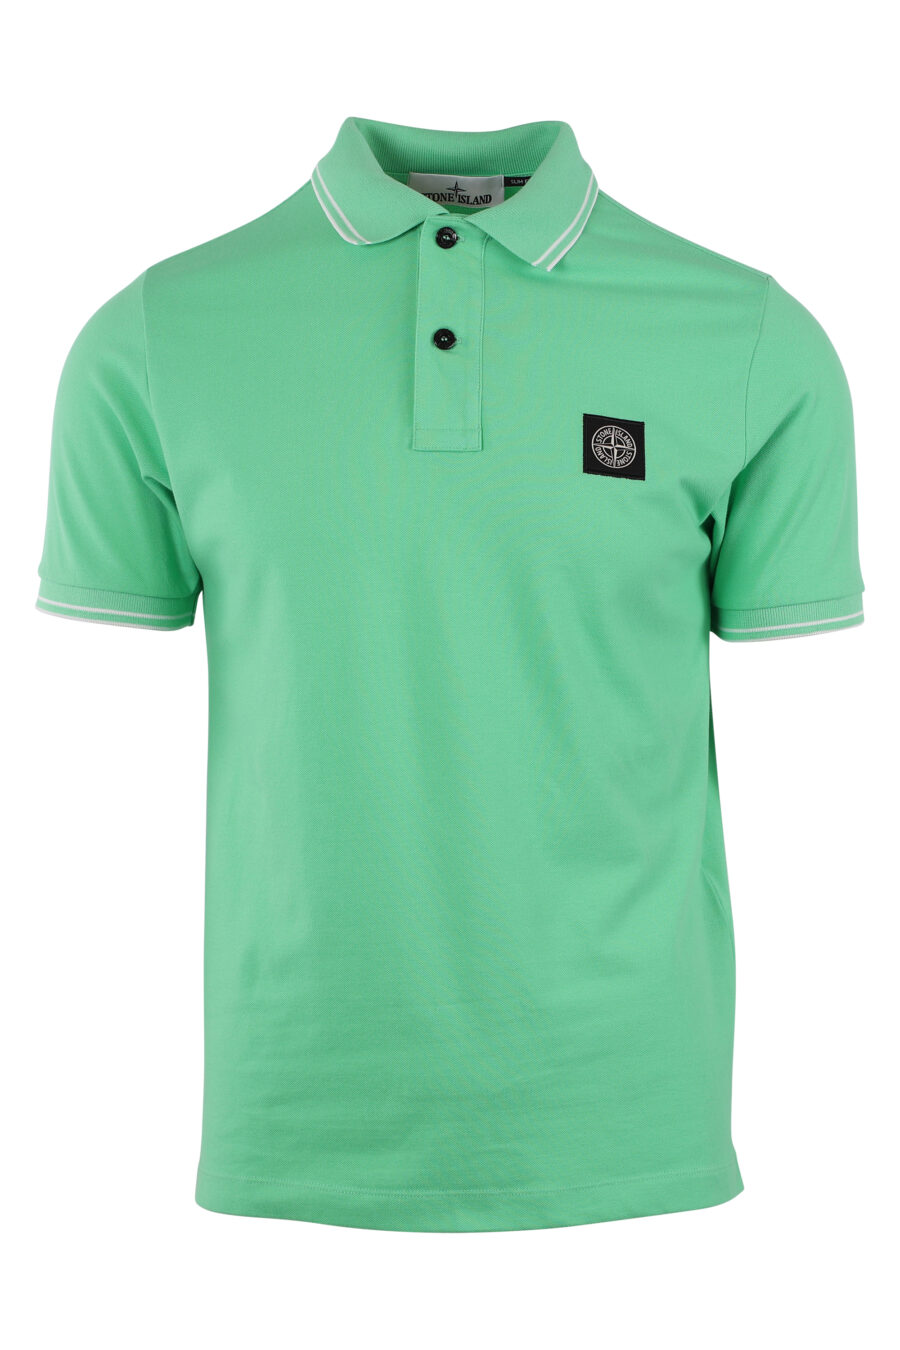 Light green polo shirt with patch - IMG 1481